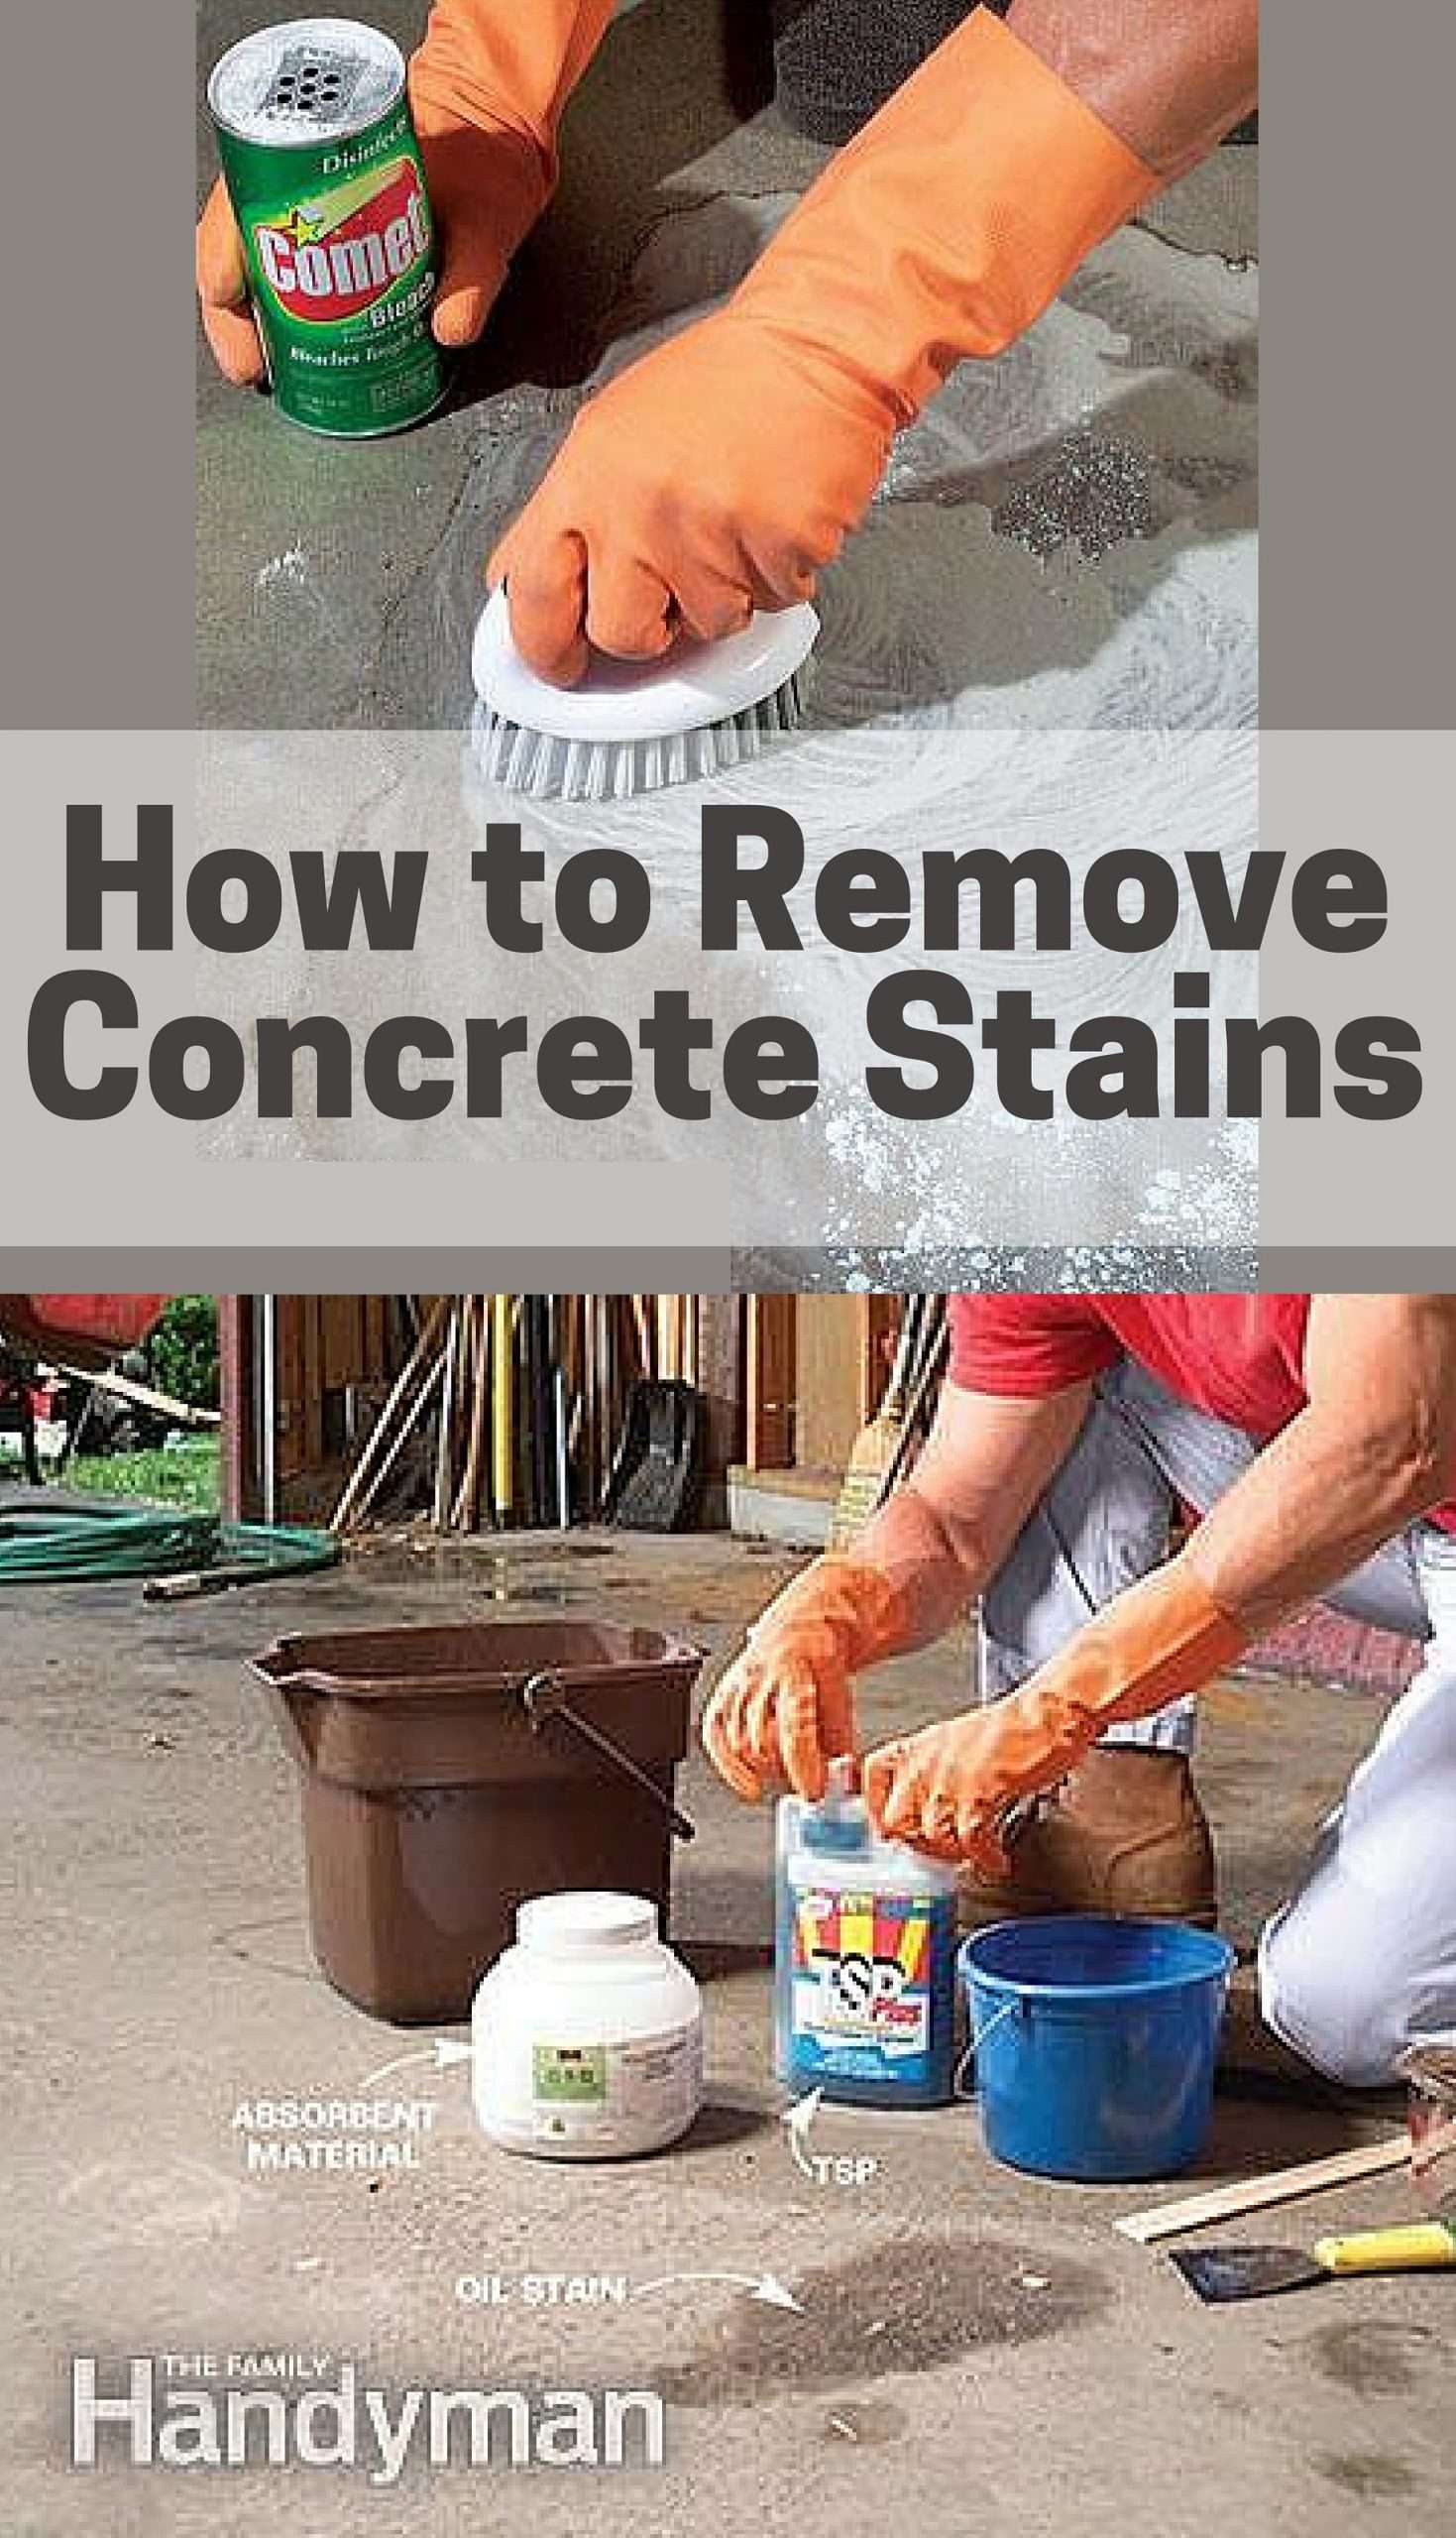 Wood Stain Off Concrete Patio, How To Get Wood Stain Out Of Concrete Patio